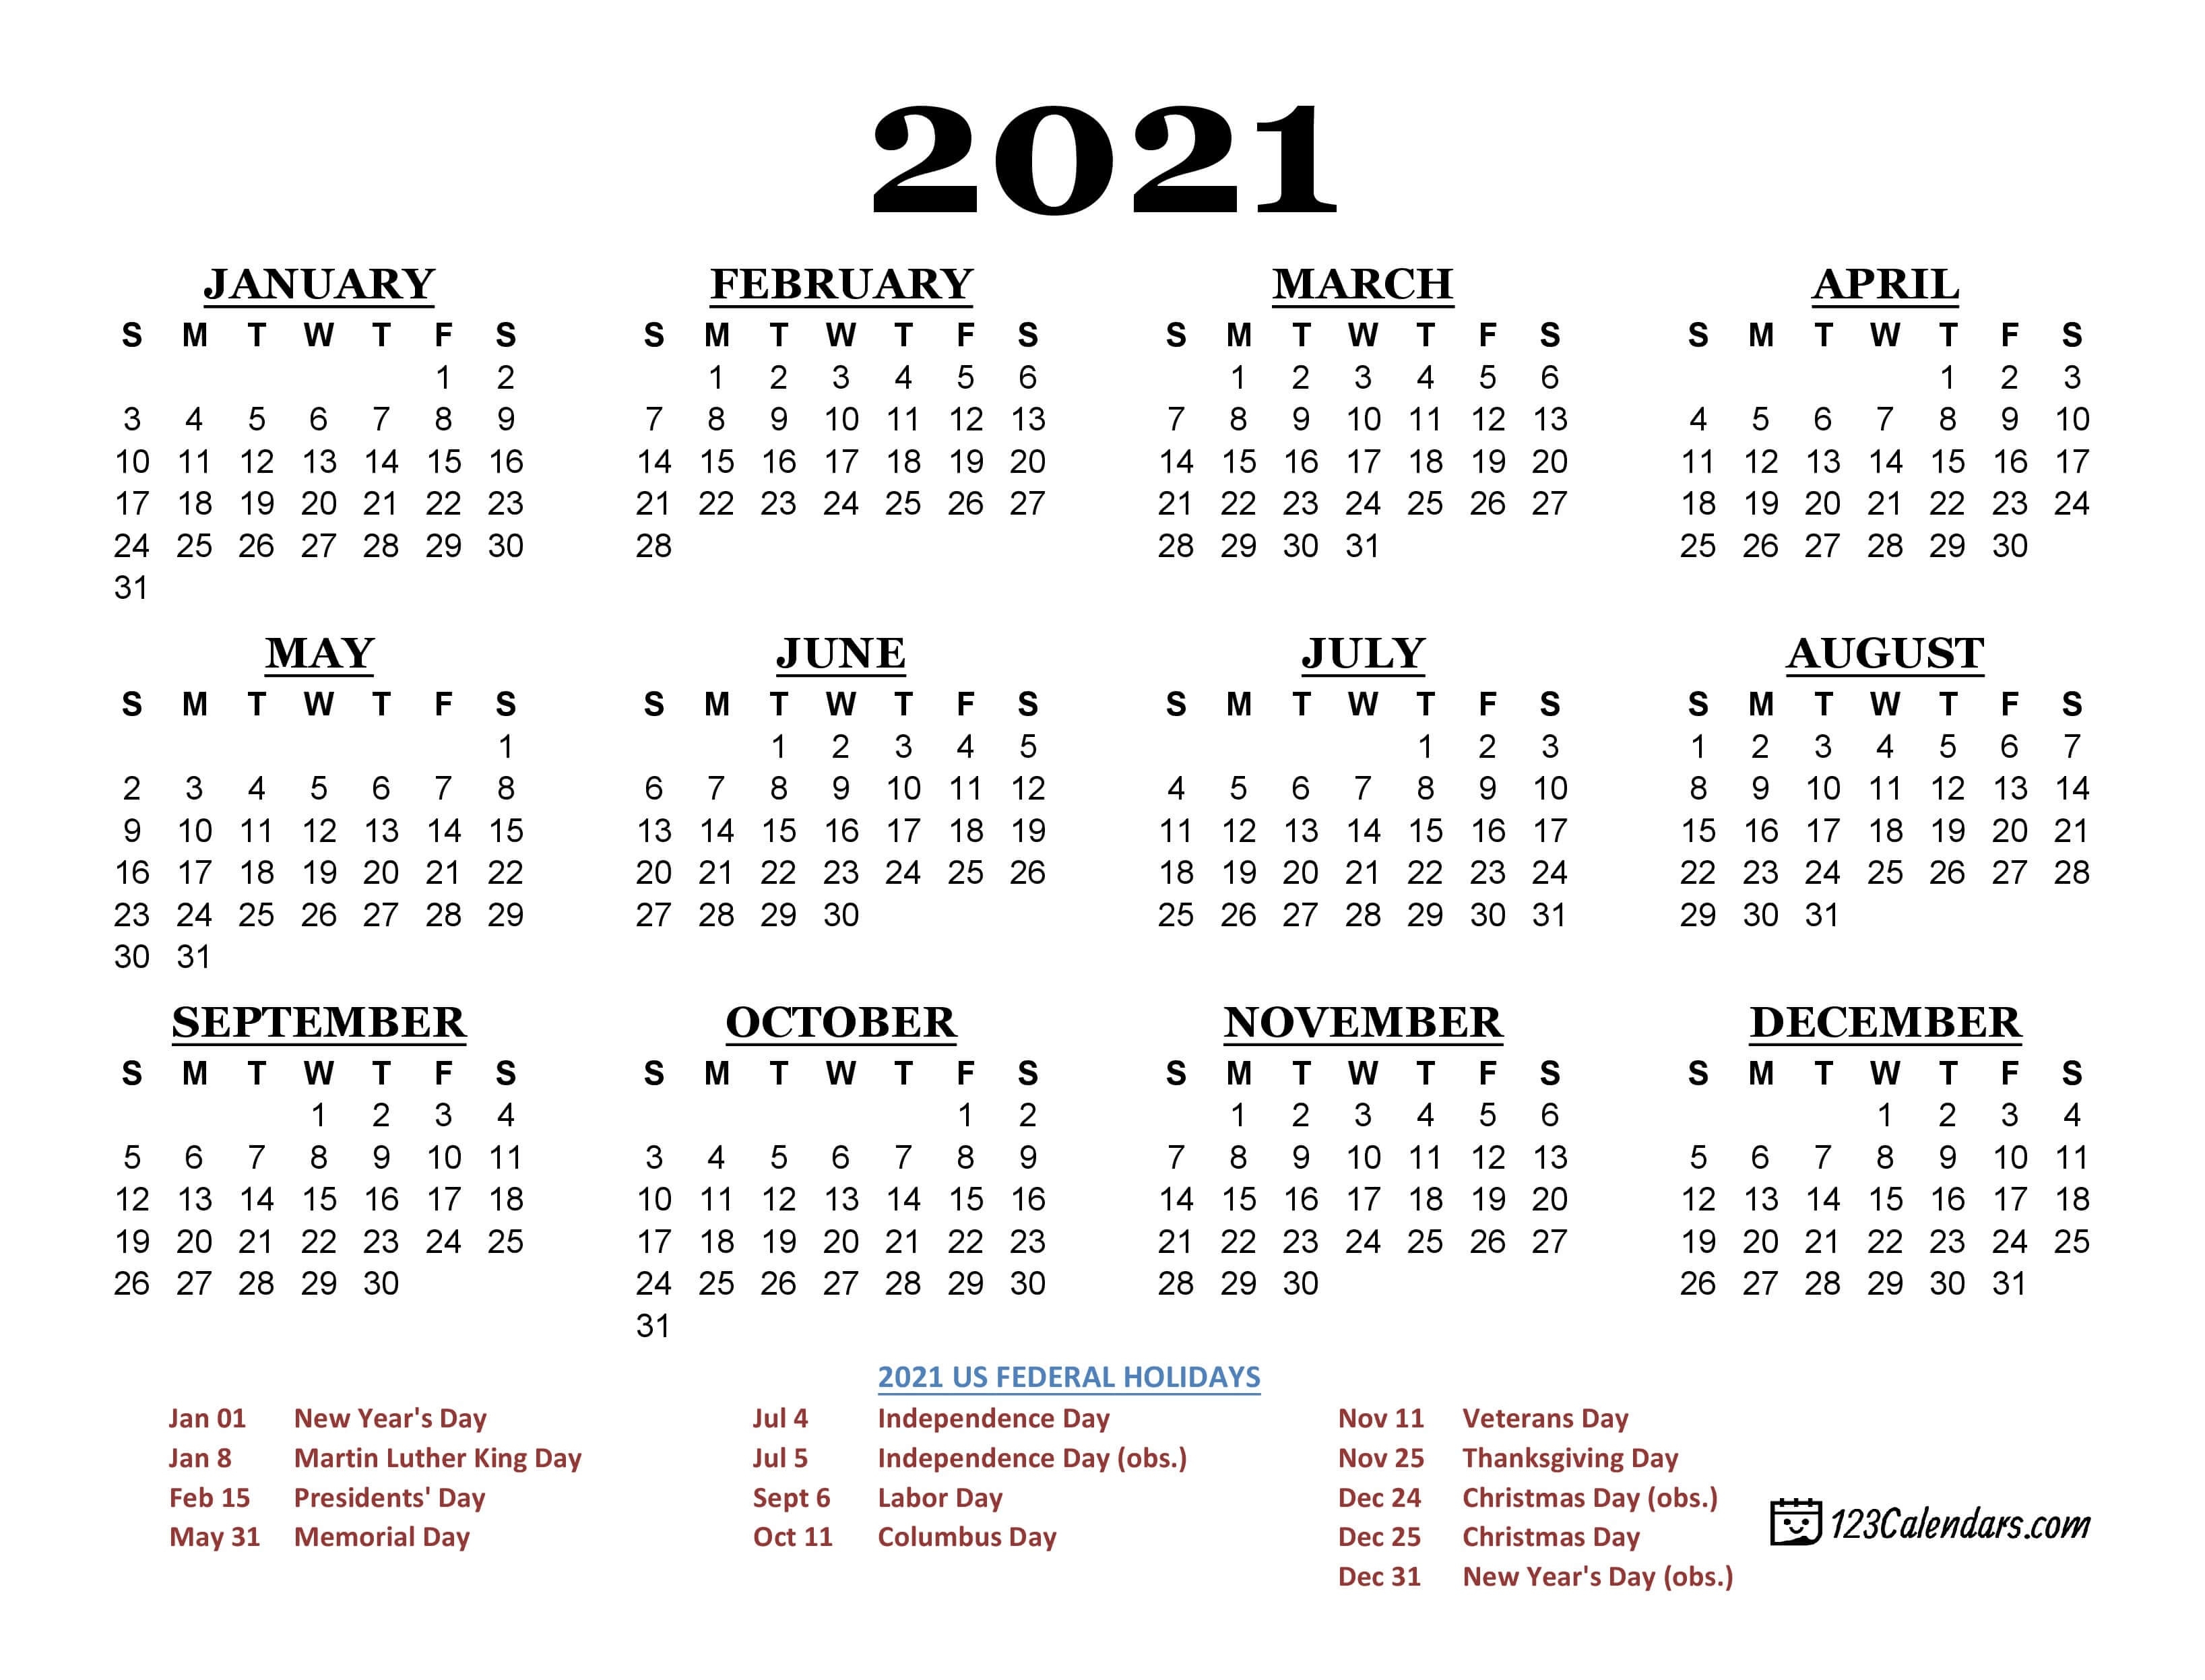 2021 Printable Calendar | 123Calendars Printable Calendar 2021 South Africa